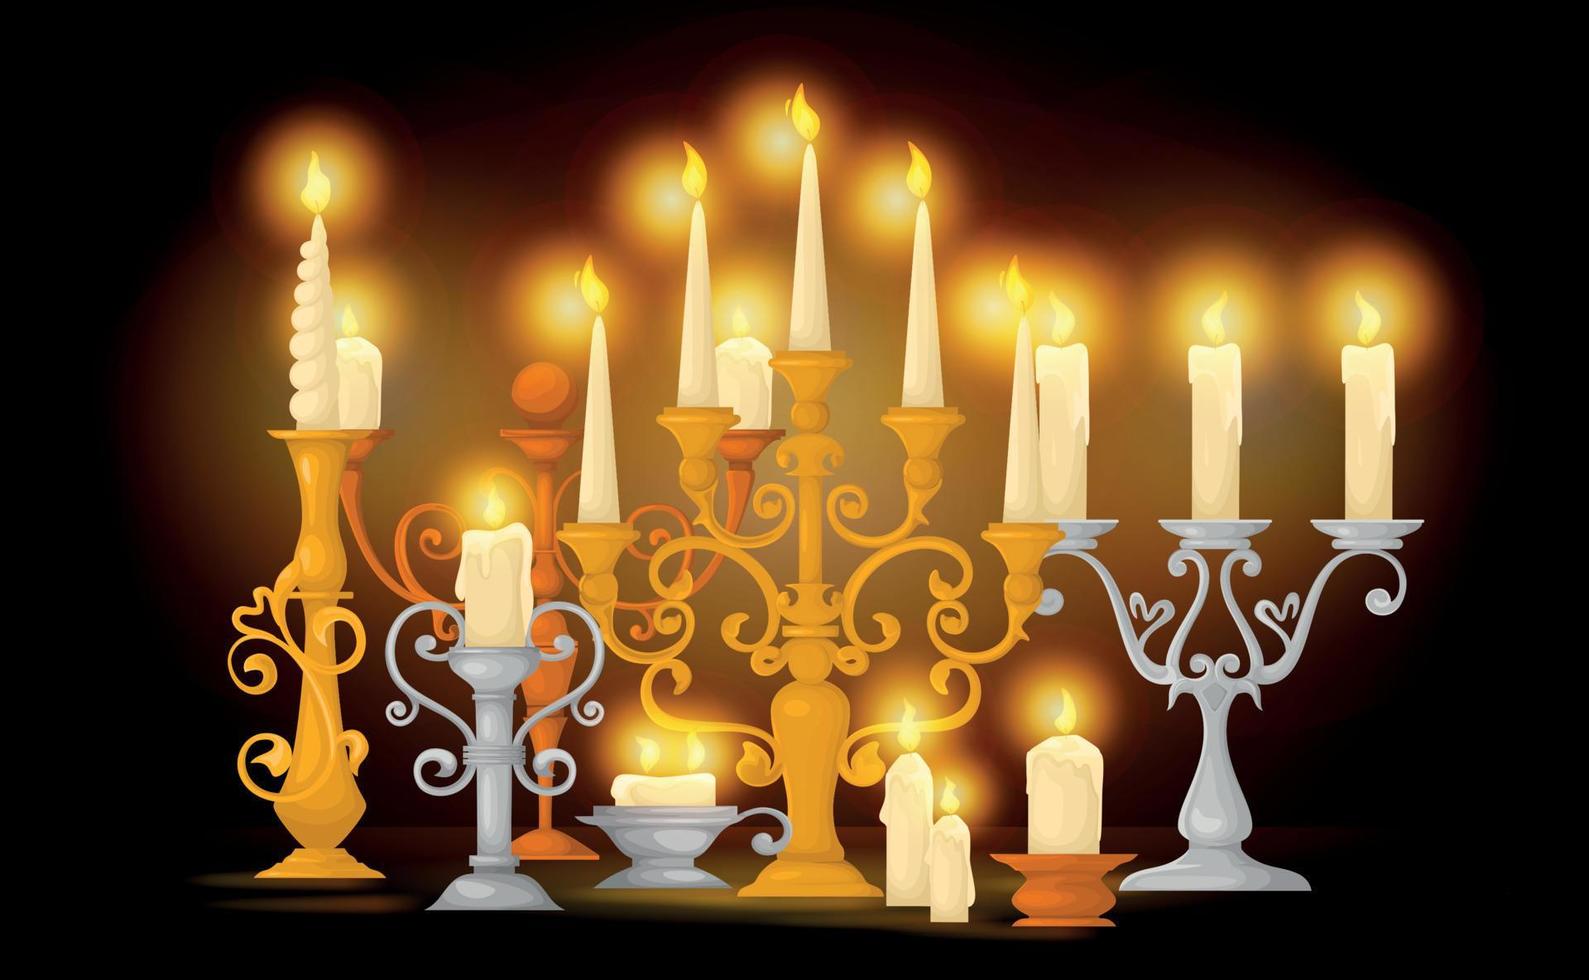 Retro Candle Holders Composition vector